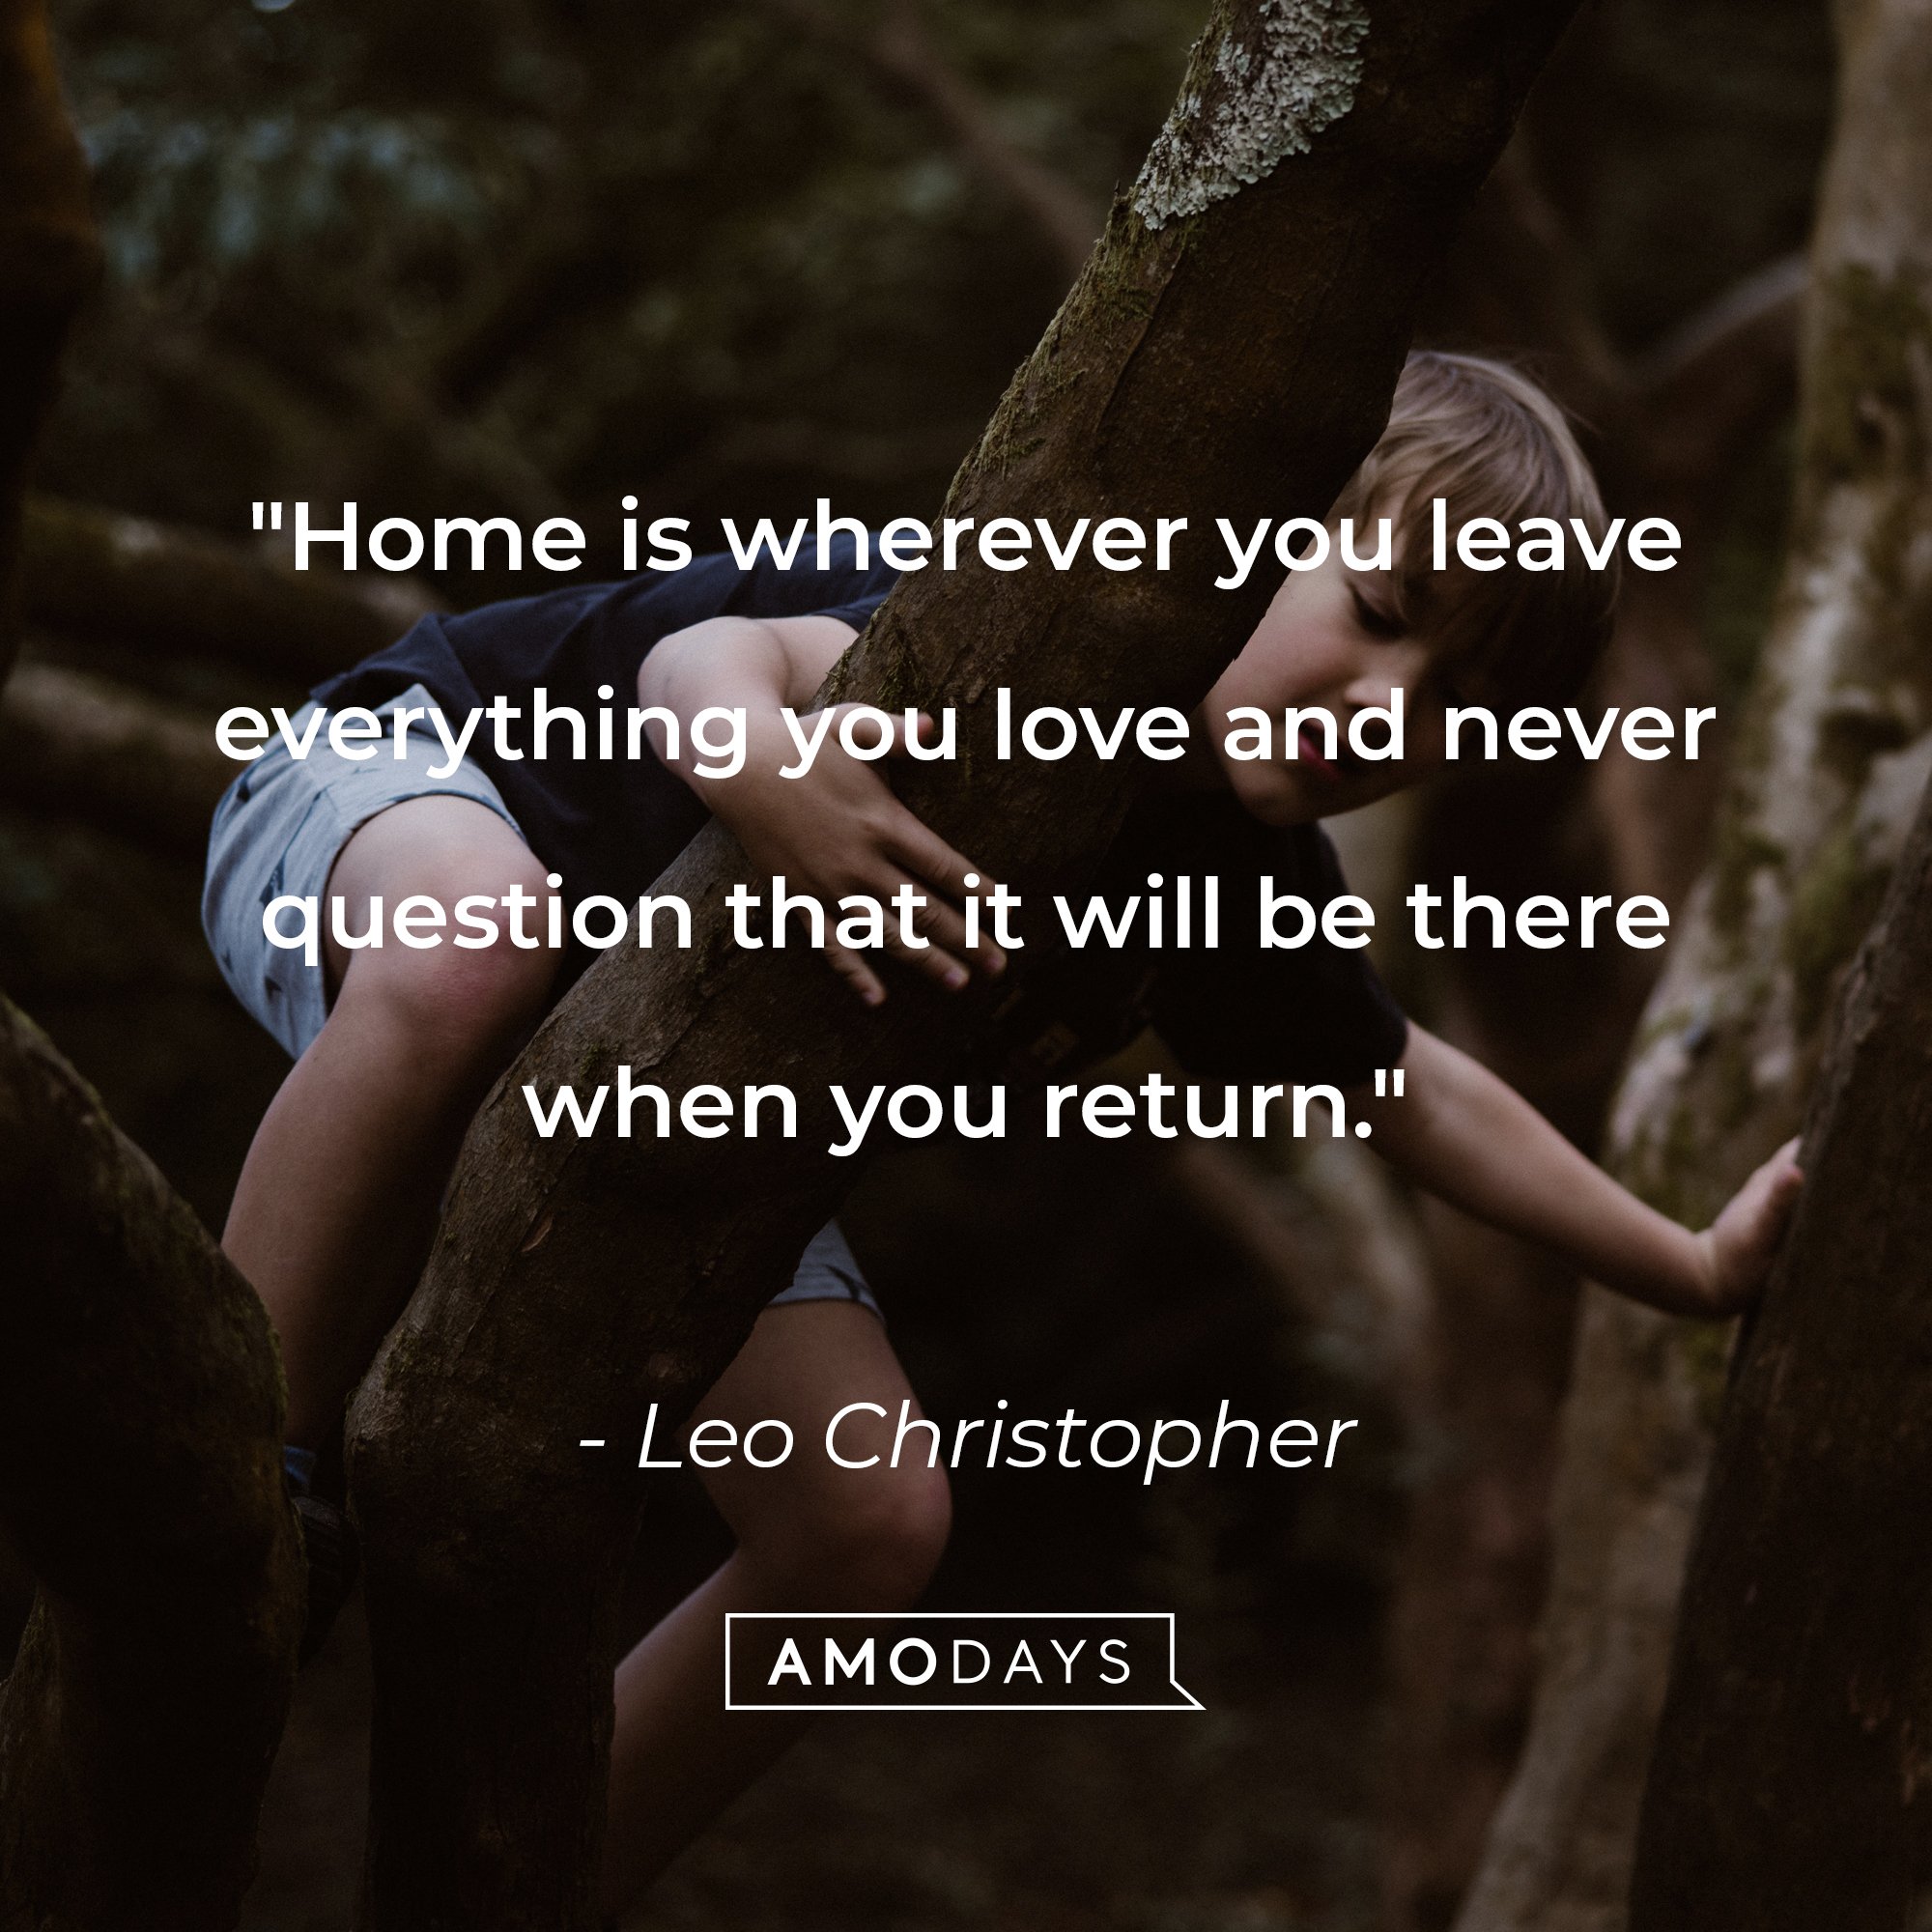 Leo Christopher's quote: "Home is wherever you leave everything you love and never question that it will be there when you return." | Image: AmoDays